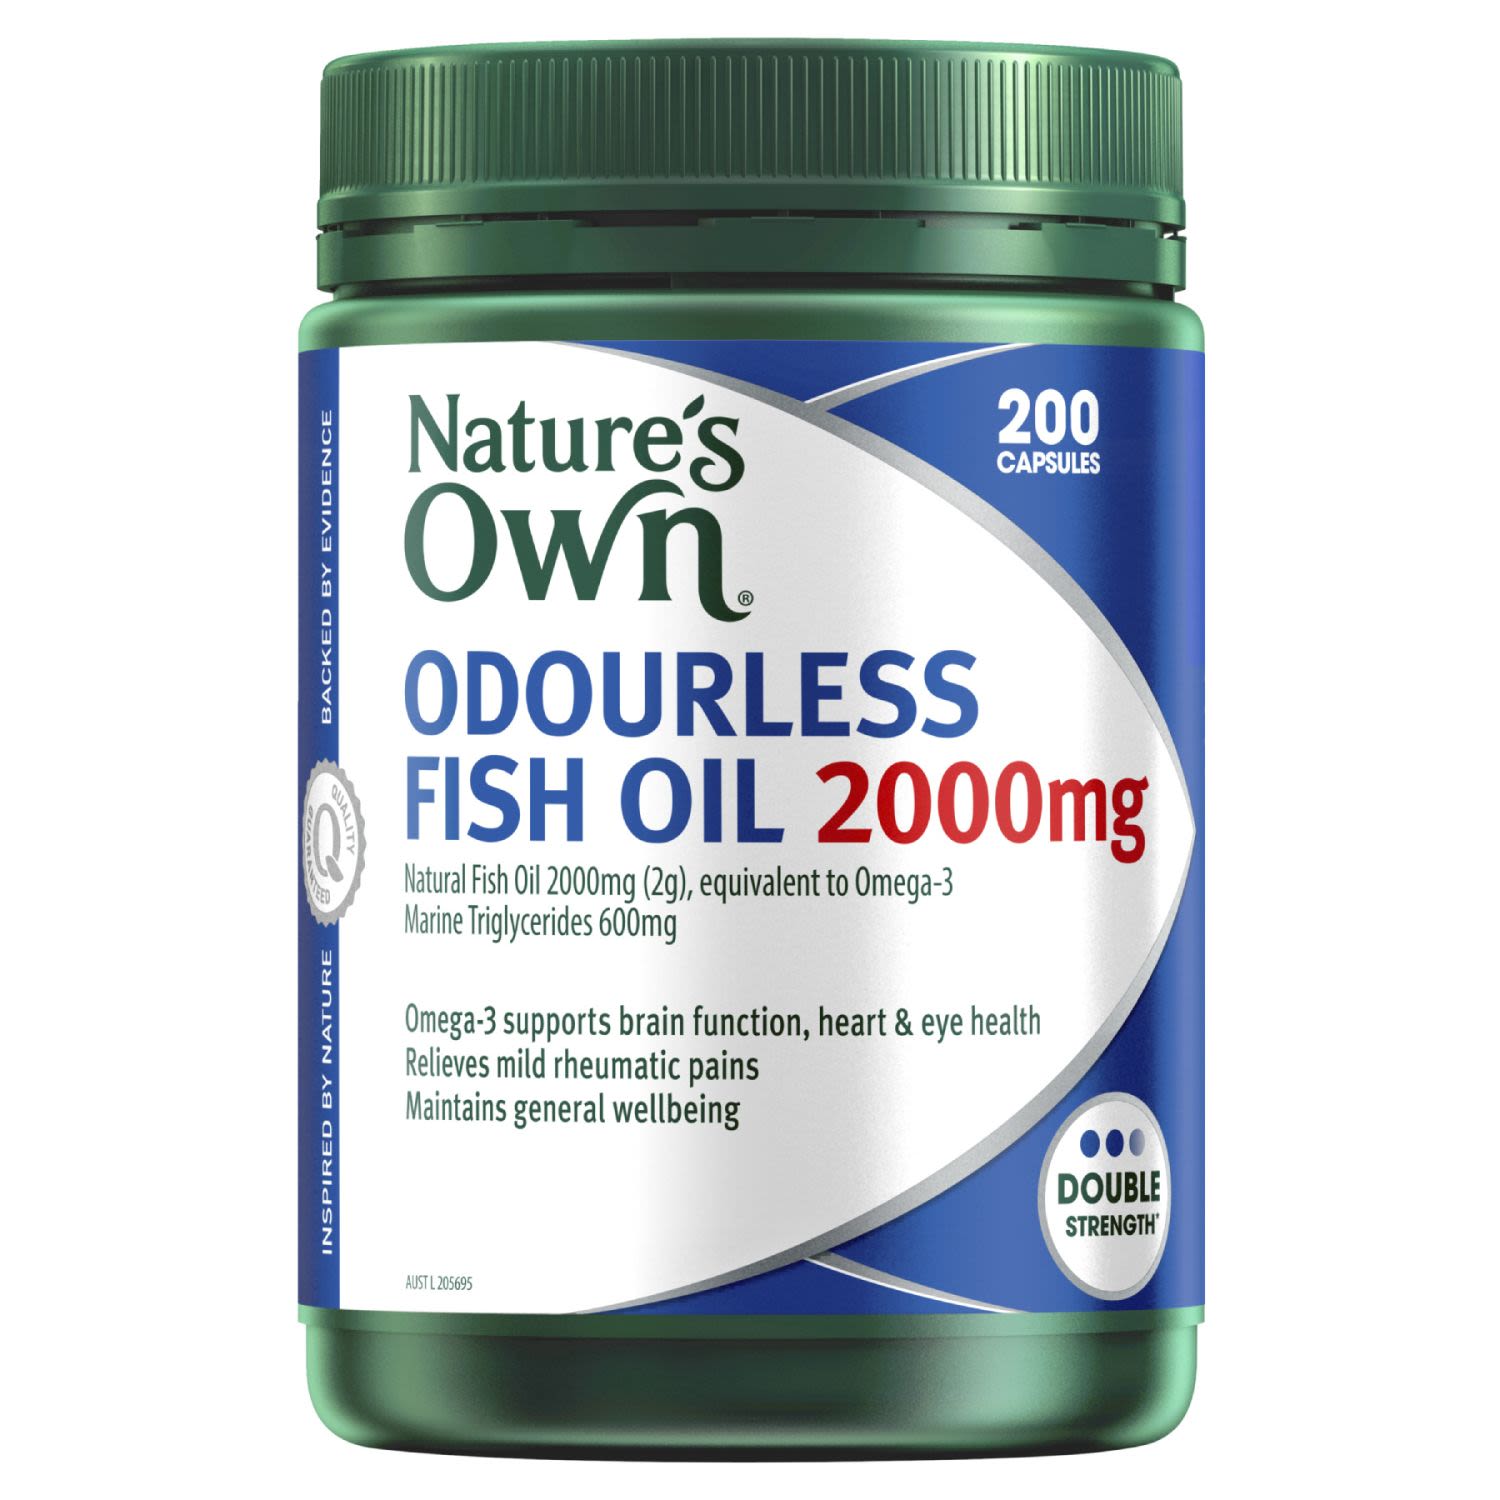 Nature's Own Odourless Fish Oil 2000mg, 200 Each